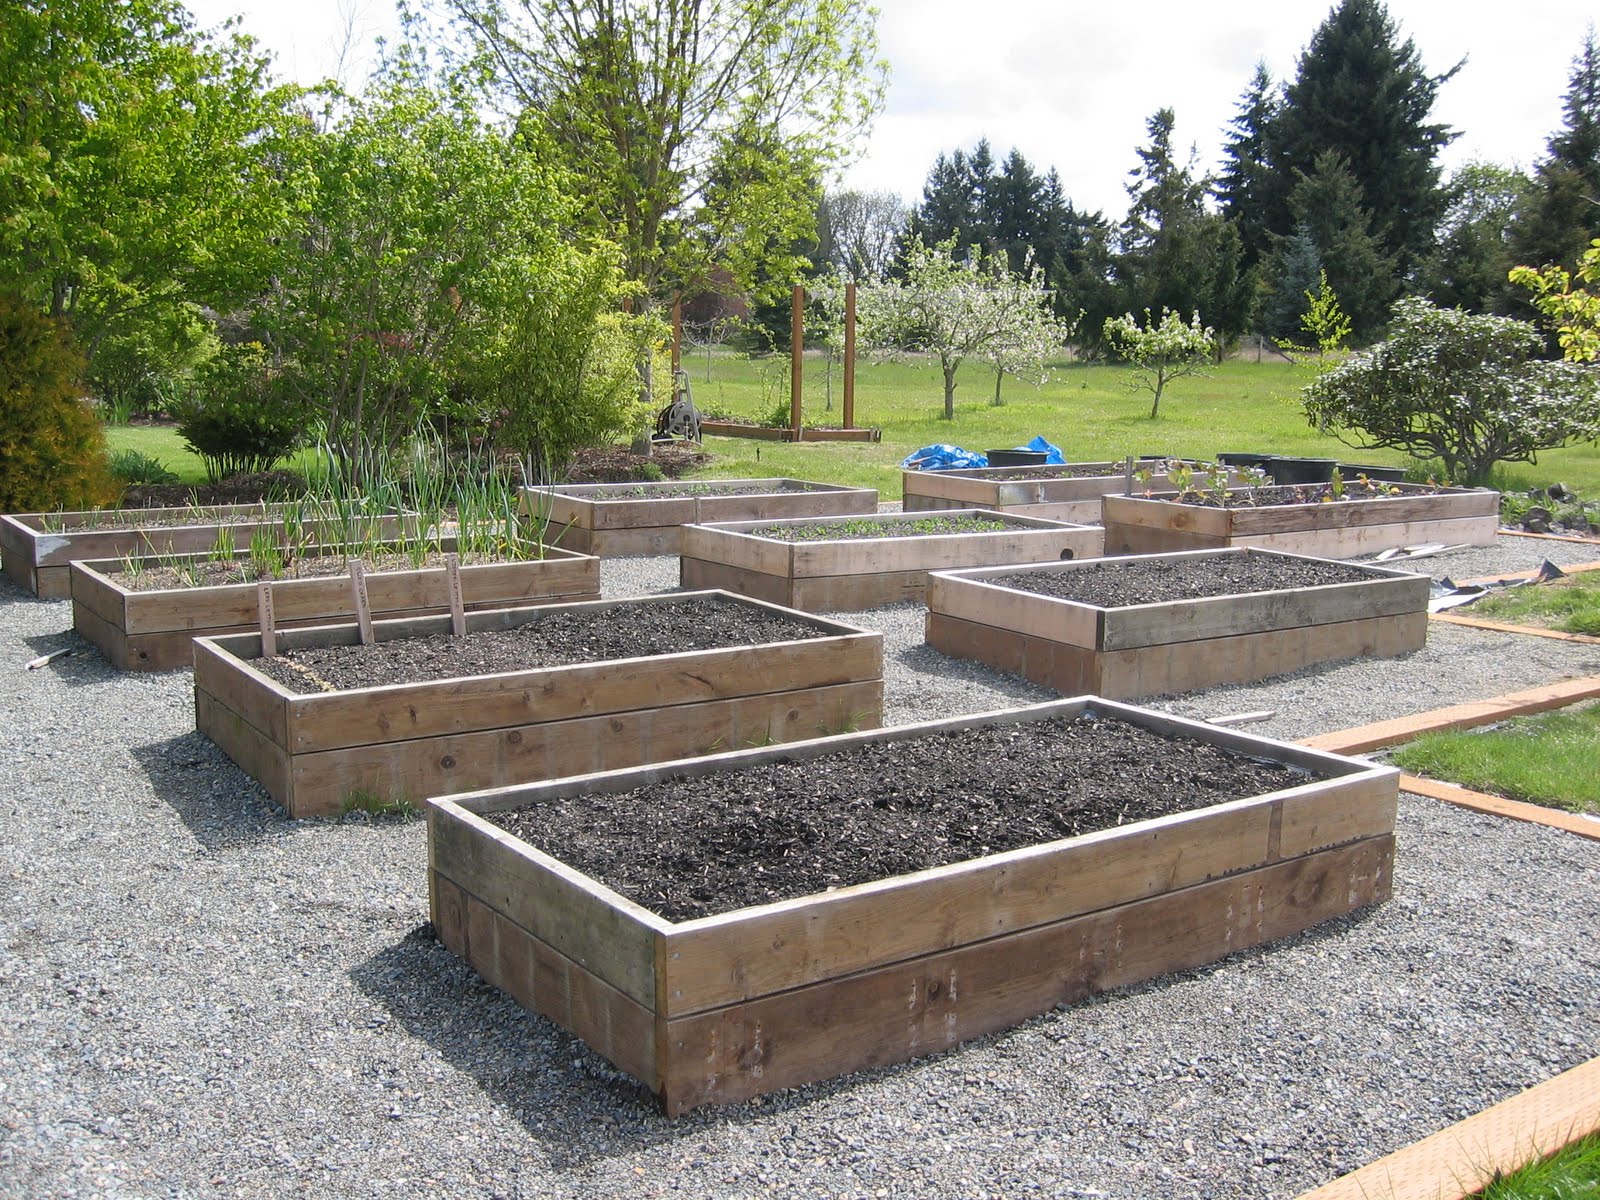 The Tacoma Kitchen Garden Journal: Raised Vegetable Beds